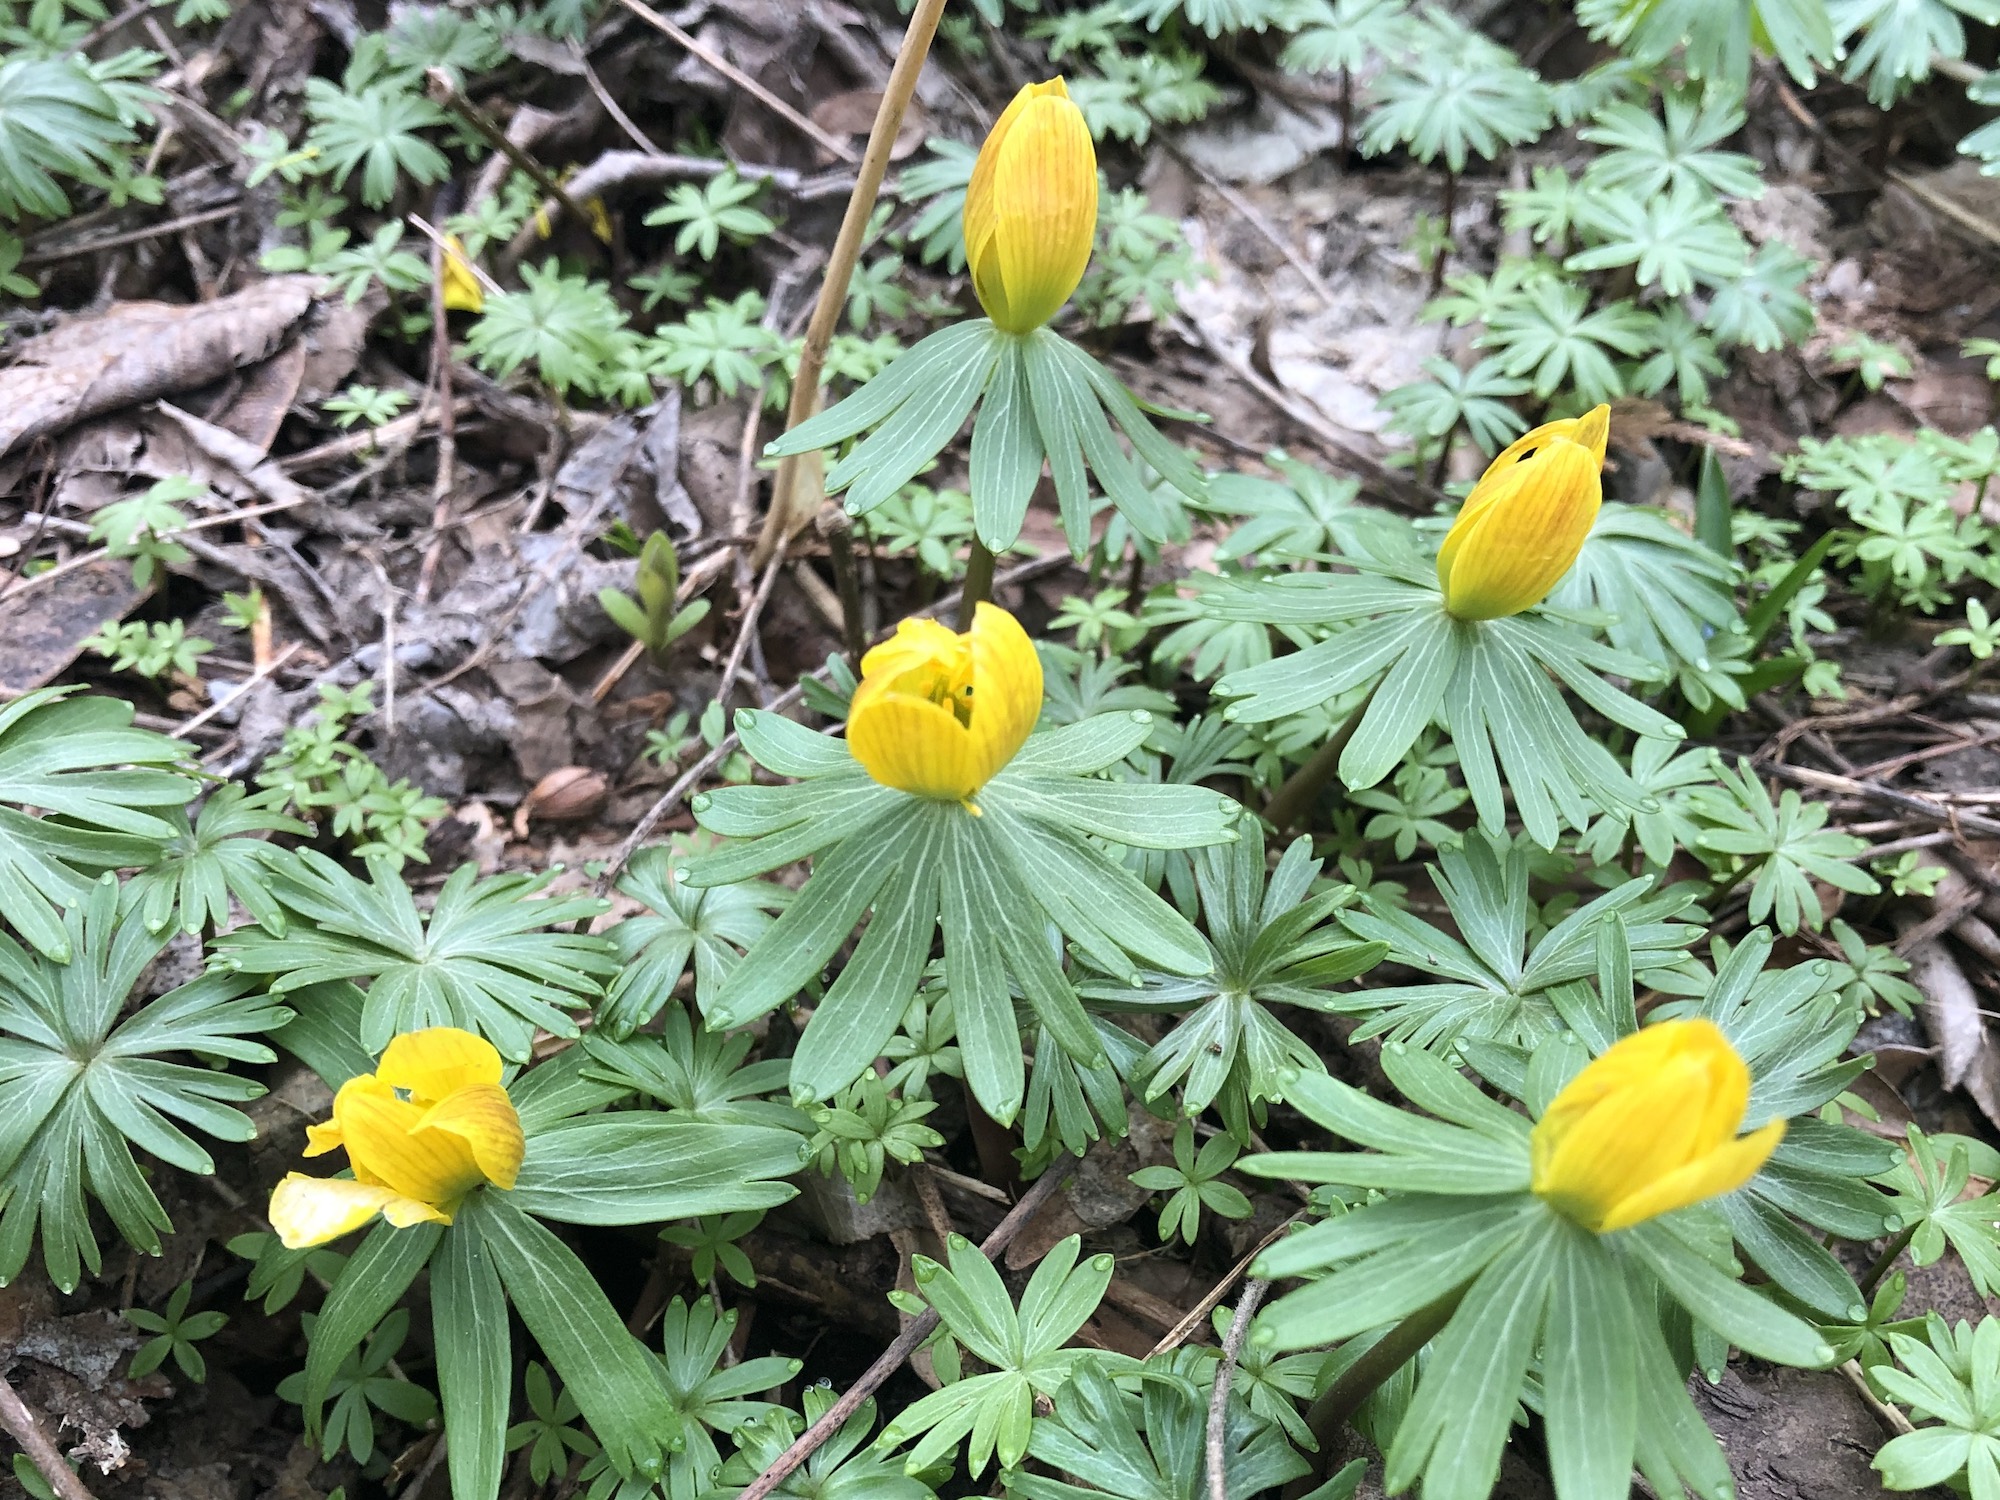 Winter Aconite in yard near the Duck Pond on March 25, 2022.